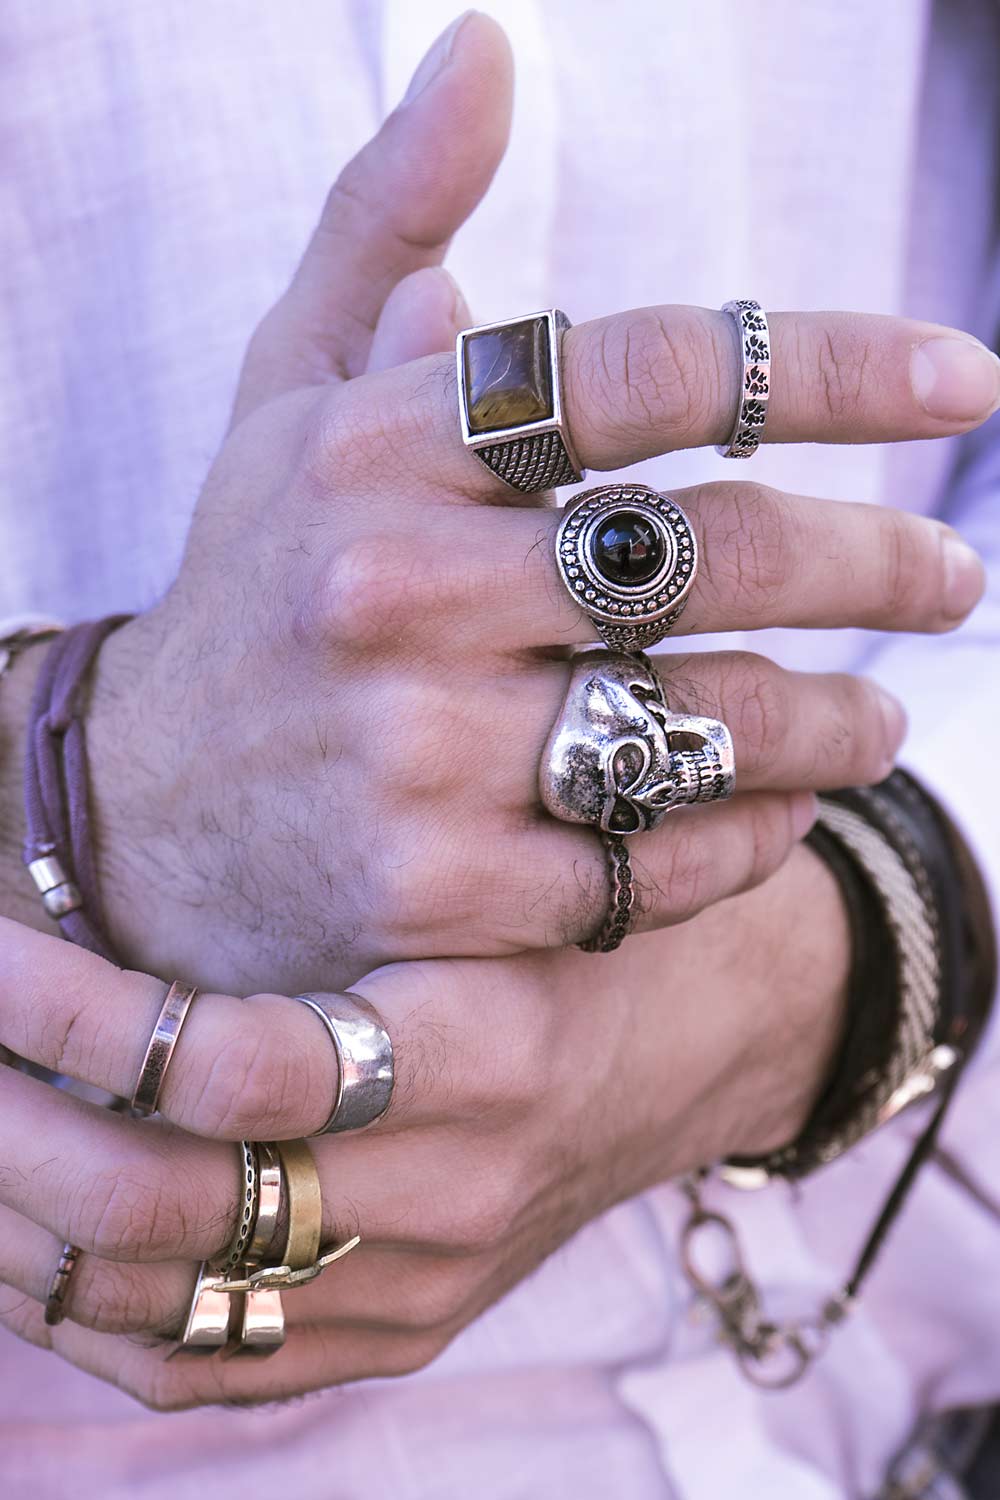 Elegant Yet Edgy: Why Modern Mens Jewelry is a Hot Selling Trend